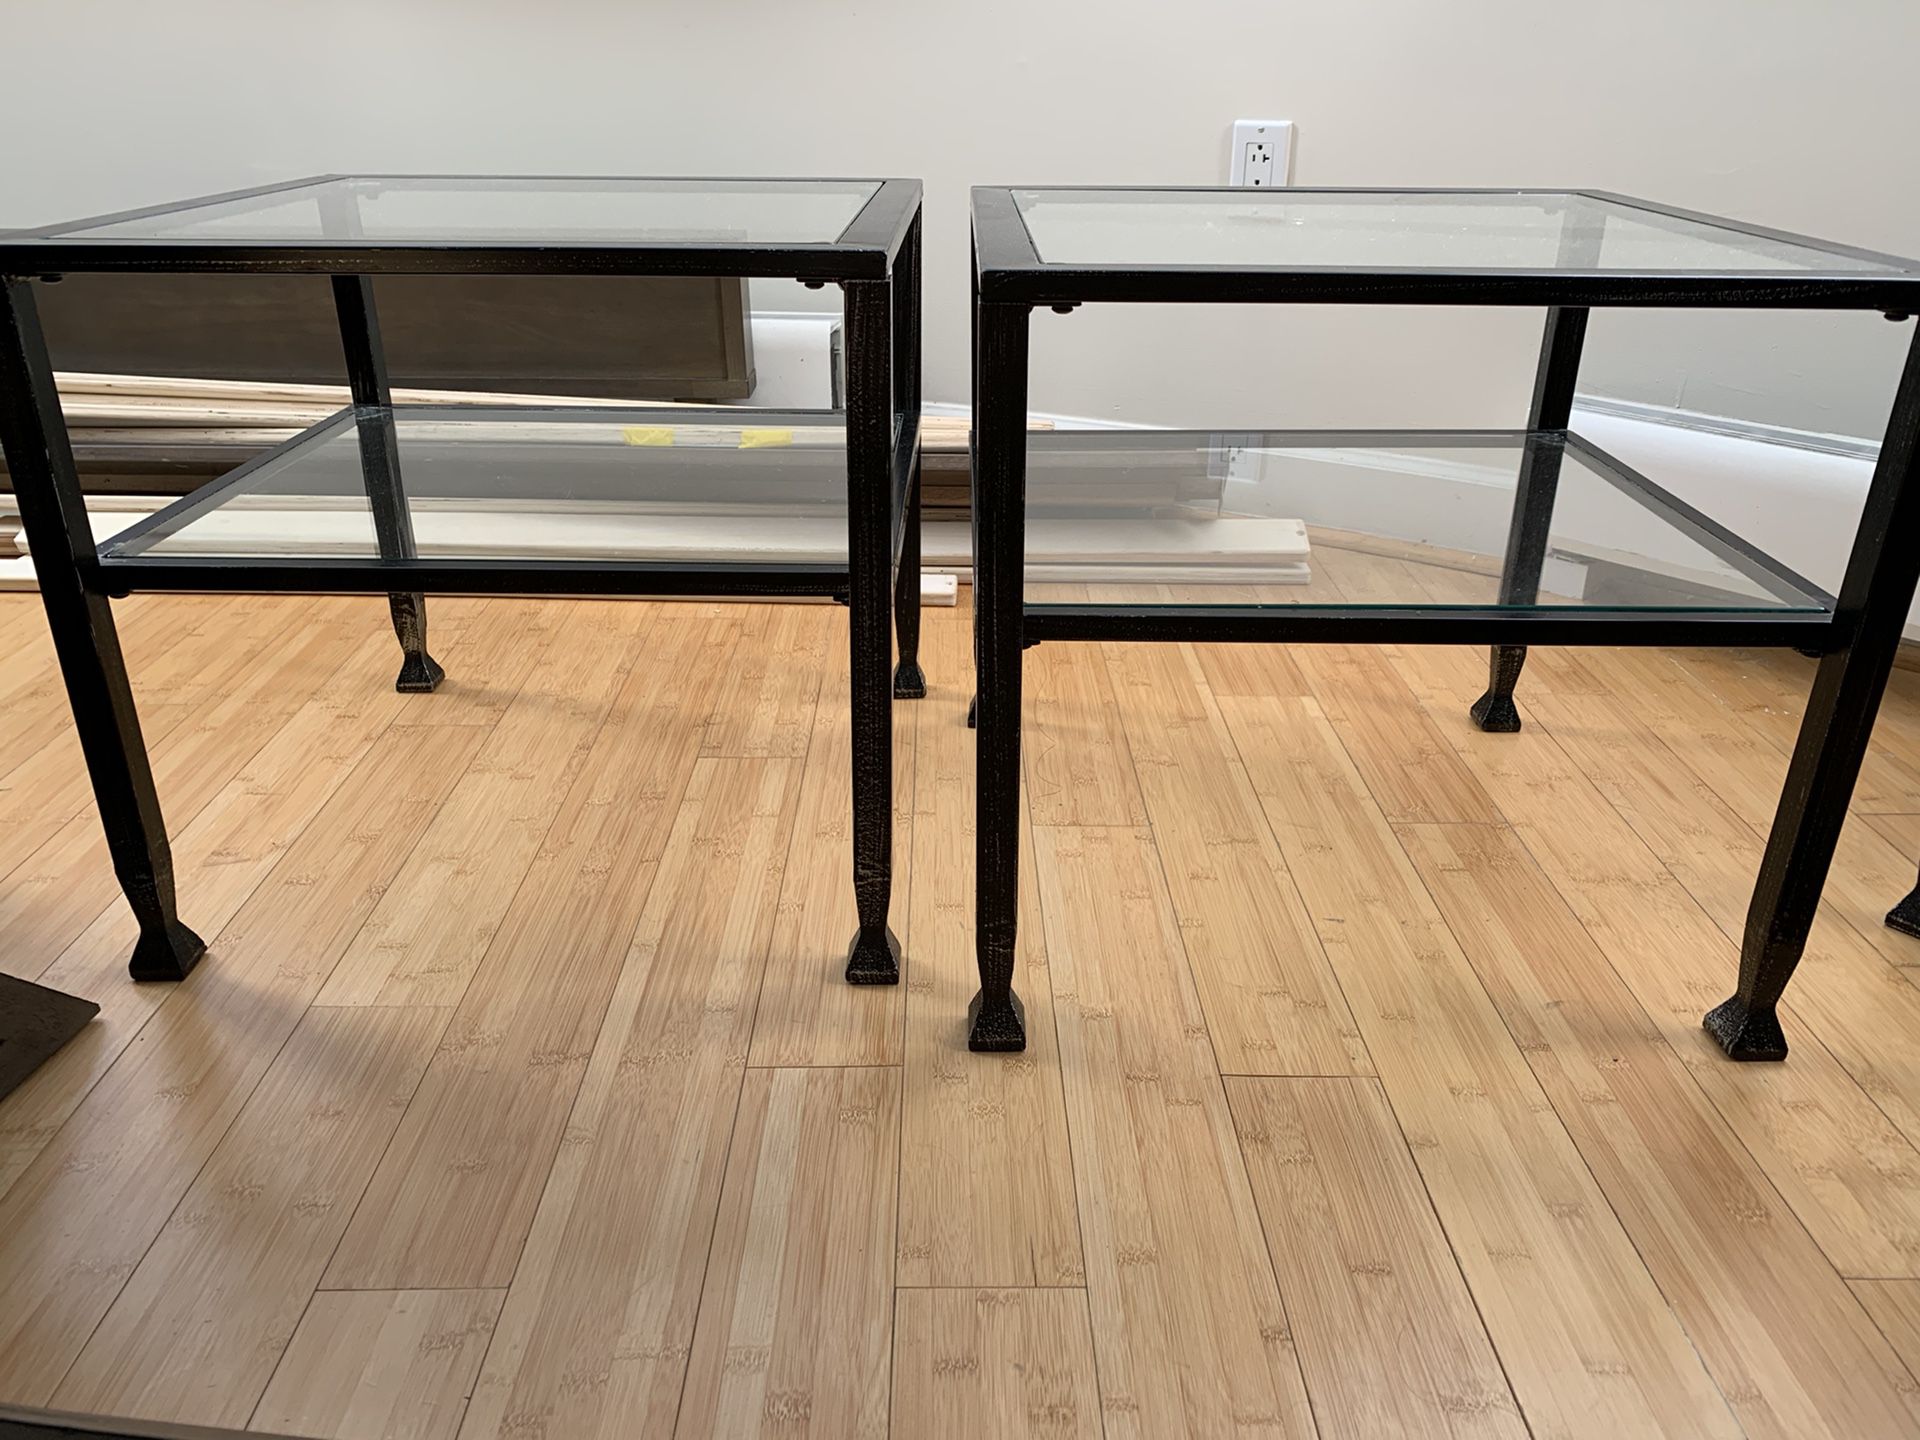 2 heavy metal (wrought iron?) and glass square end / side table tables black with extra shelves under top glass. Very nice. Dimensions 20 x 20 x 18H